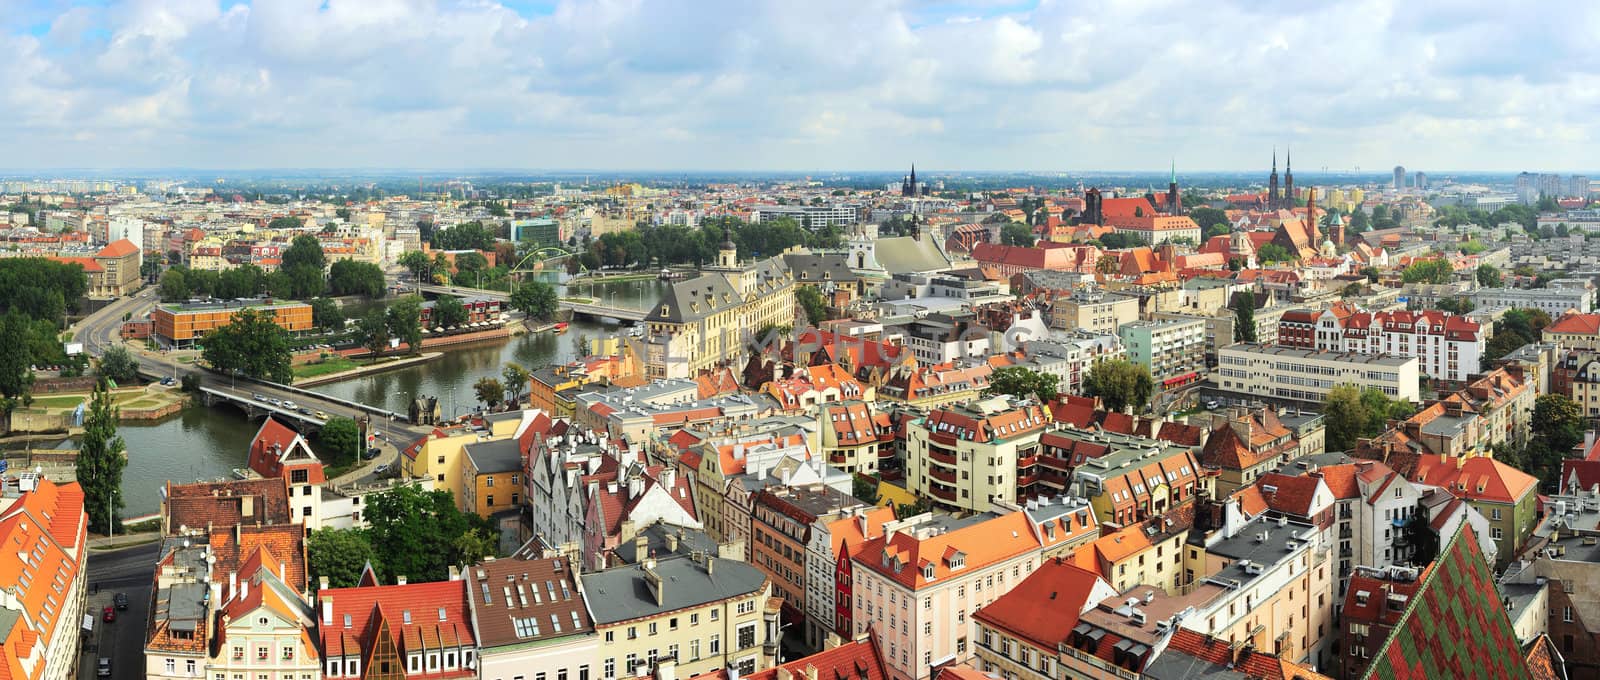 Aerial view on Wroclaw from  Cathedral of St. John the Baptist. Wroclaw is the historical capital of Silesia.